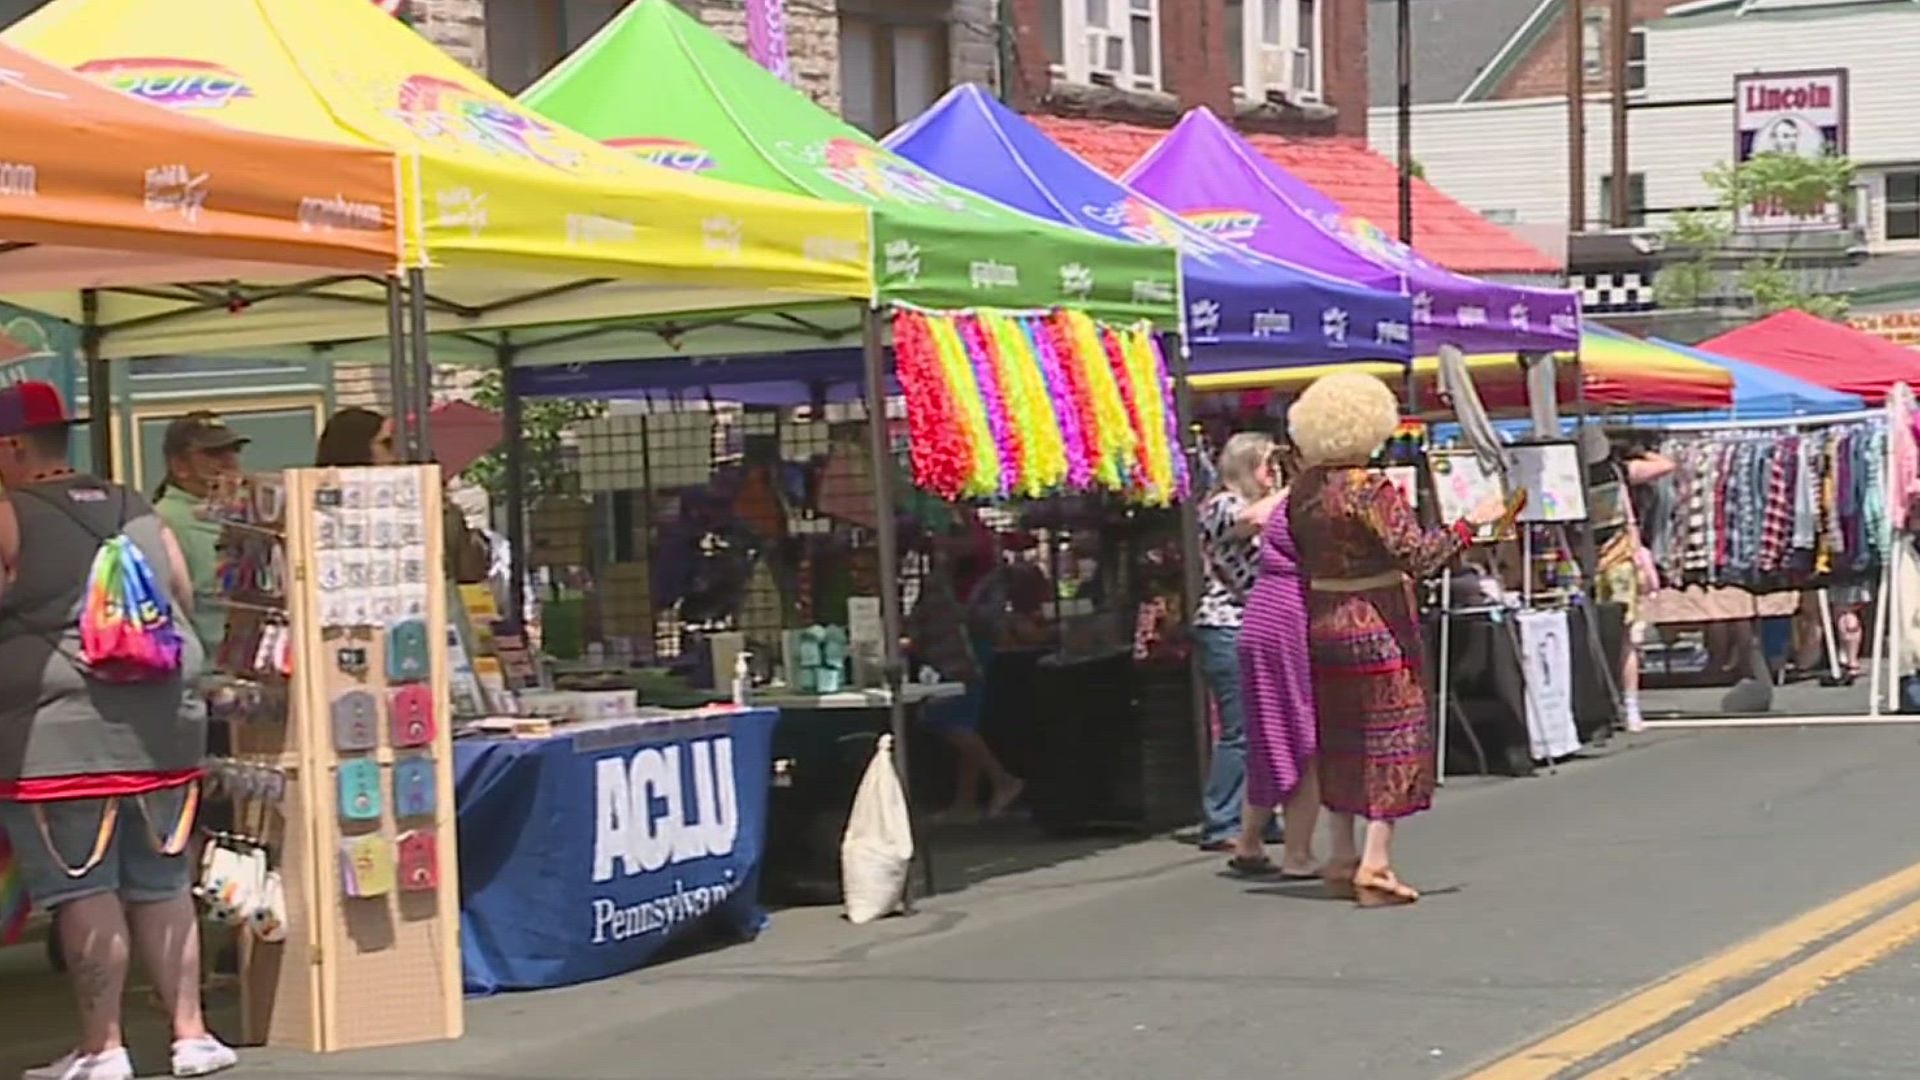 The borough in Adams County celebrated its seventh annual Pride Festival on June 3rd.